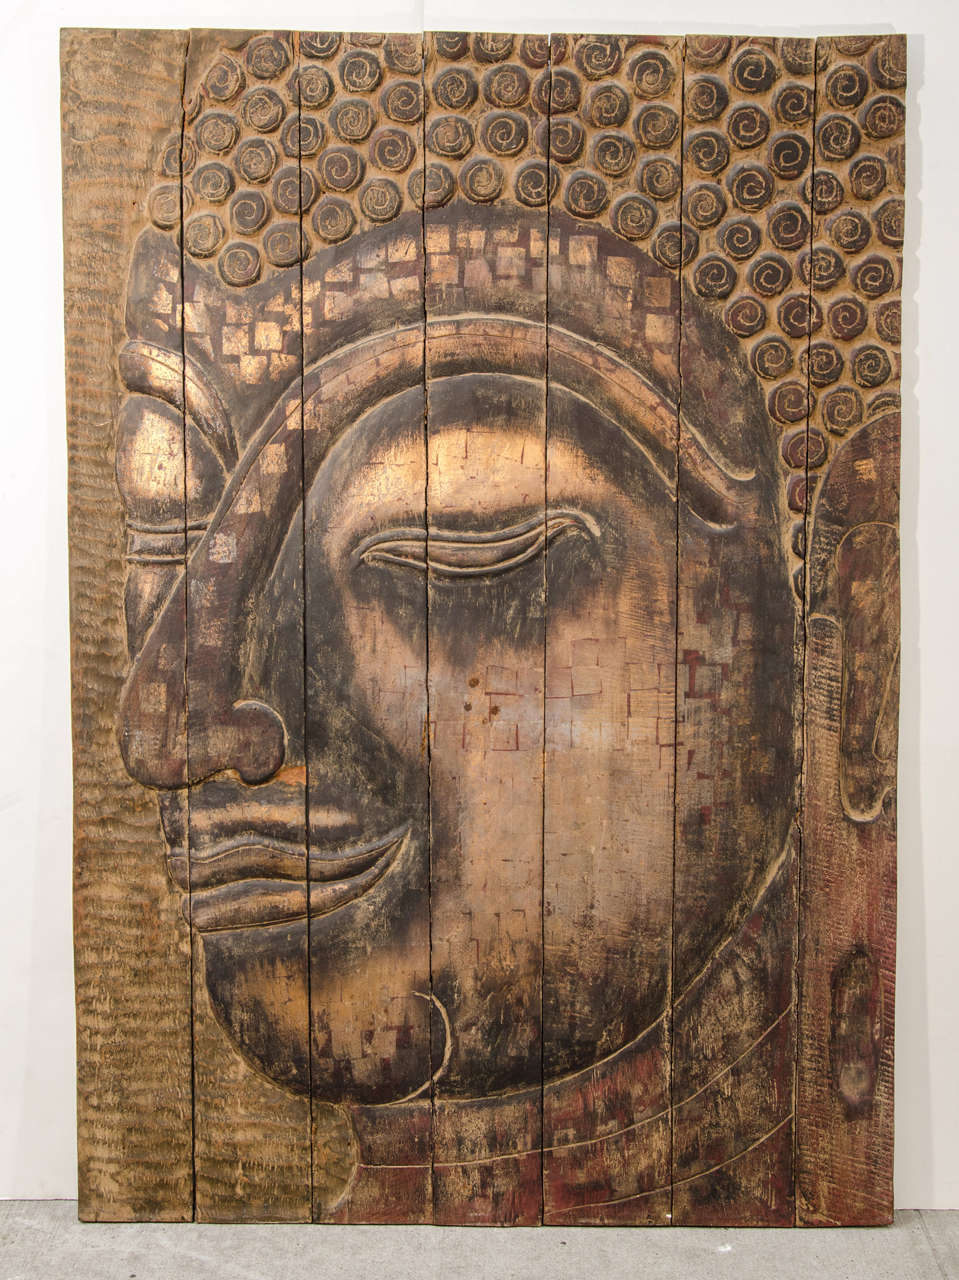 Exceptional contemporary art wall panel of Buddha. The piece is comprised of large wood panel slats vertically aligned to form the face of Buddha. Hand crafted and hand carved from pieces of reclaimed wood.  The panel has a variety of carvings and